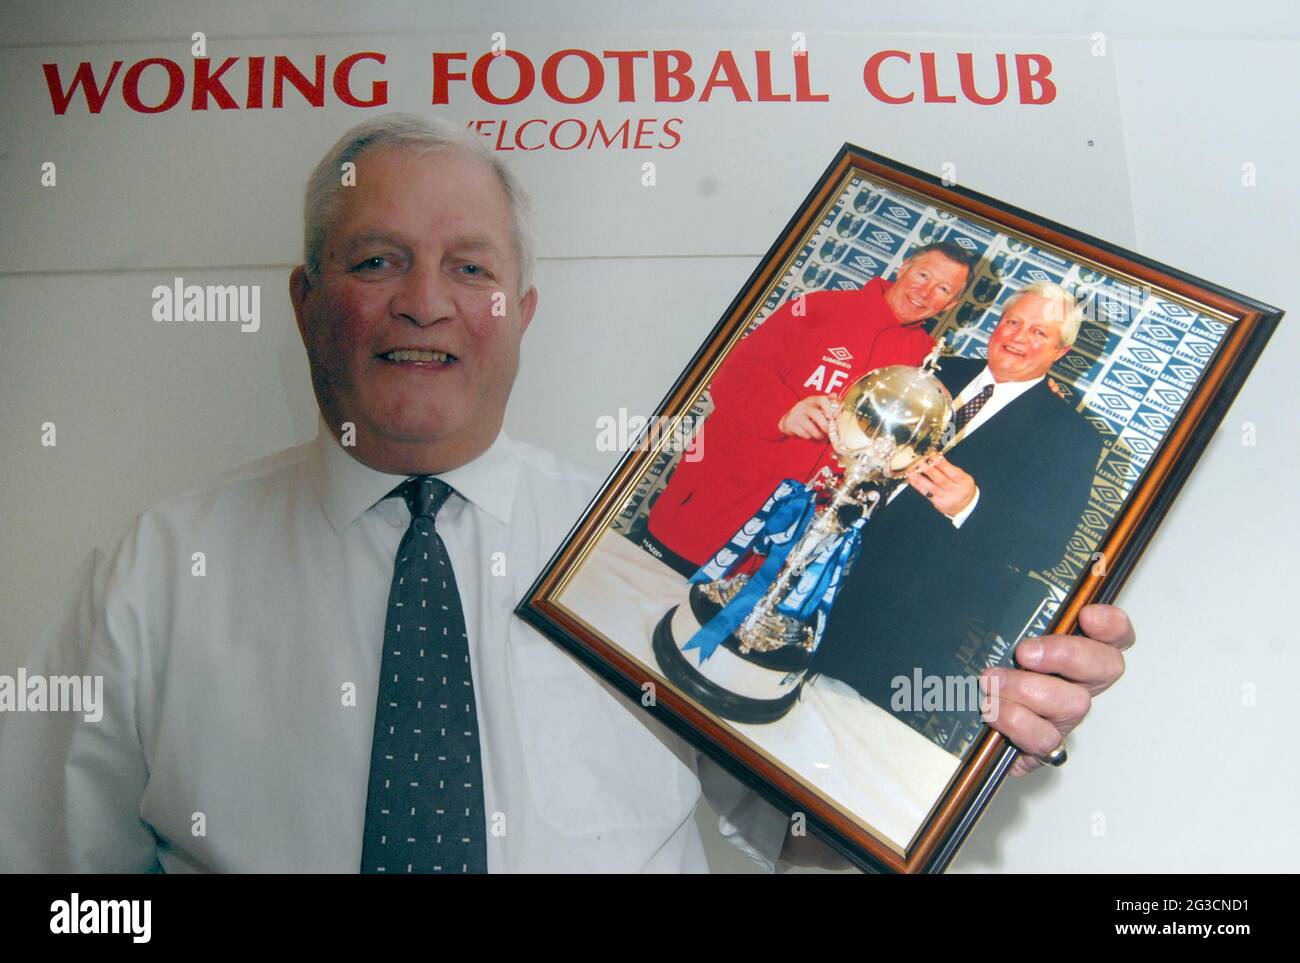 Geoff Chapple, commercial manager of Woking who face Swindon in the FA Cup this weekend, pictured with Sir Alex Ferguson. after winning the FA Trophy with Kingstonians Geoff is the most successful manager in non-league history having made the First Round 12 times and knocked out seven league clubs. Pic Mike Walker, 2009 Stock Photo